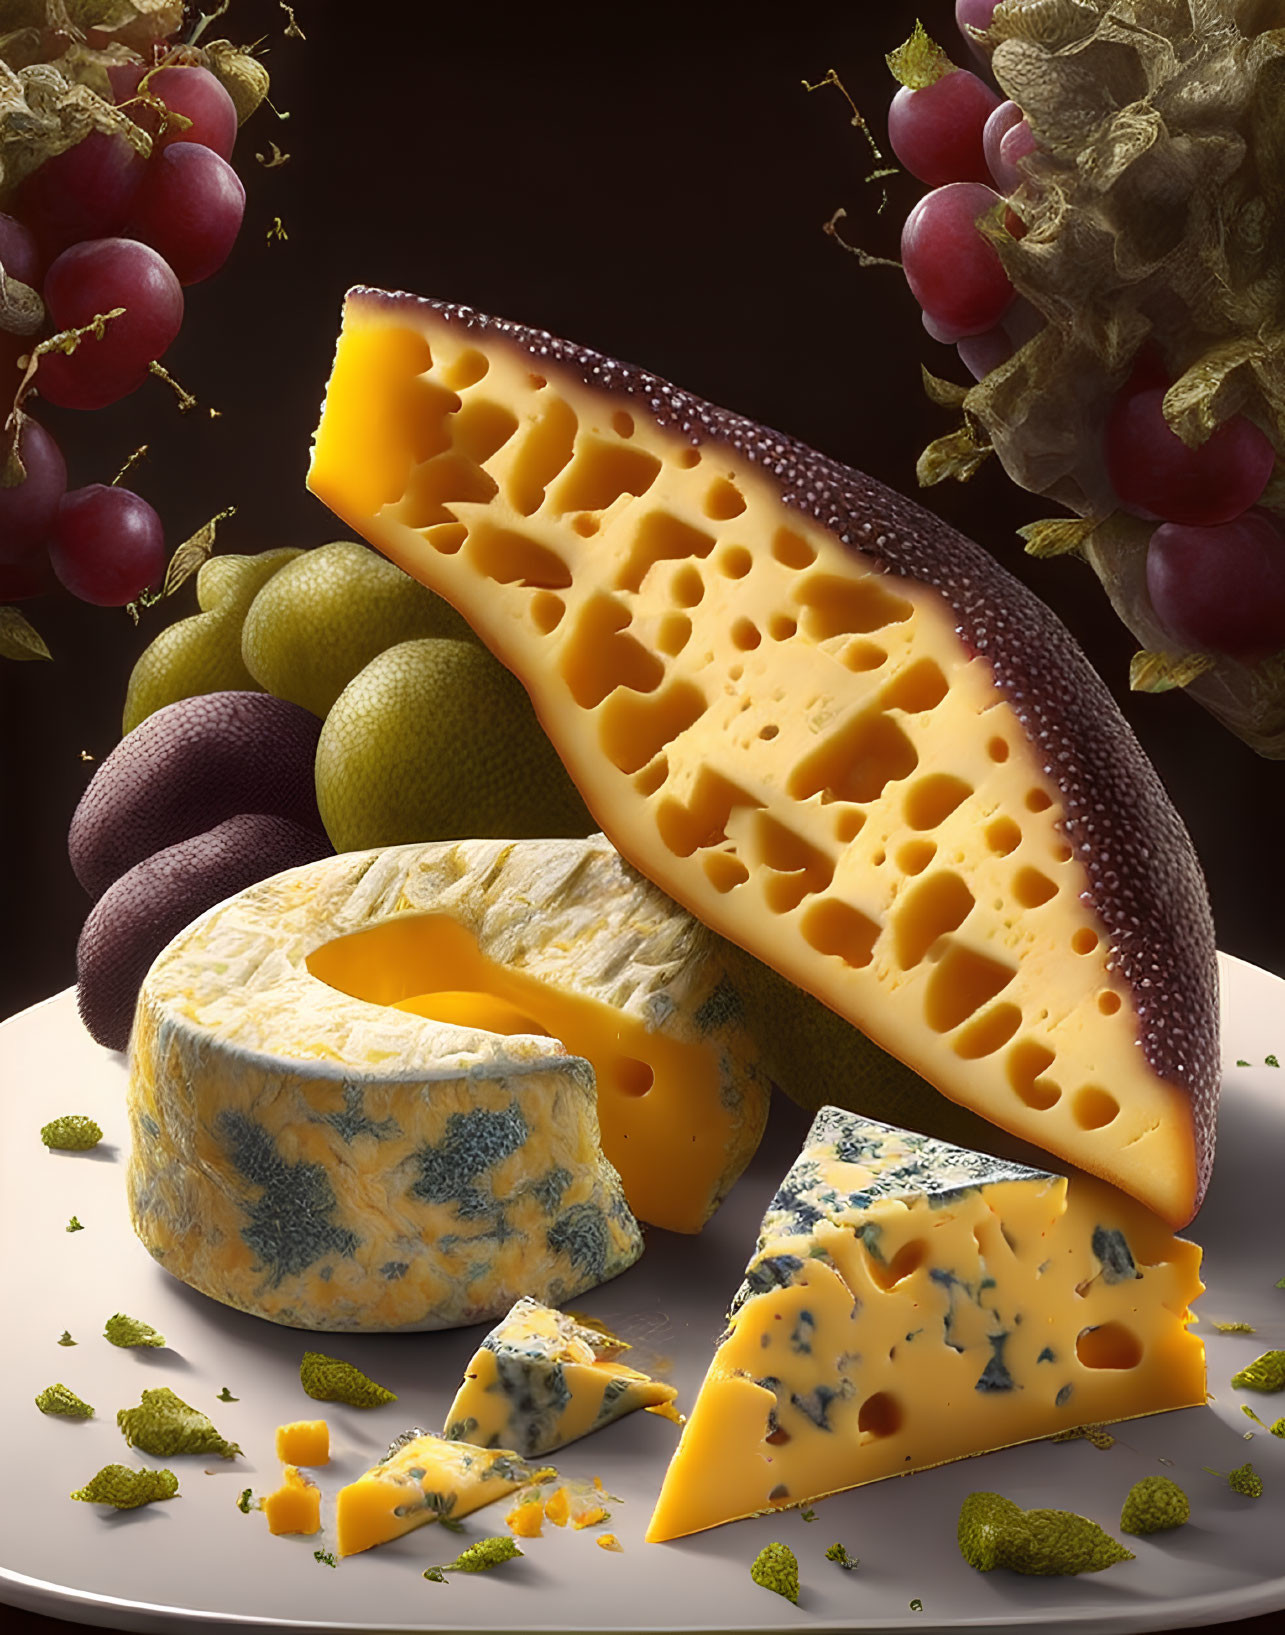 Assorted Cheeses and Fruits Still Life on Dark Background